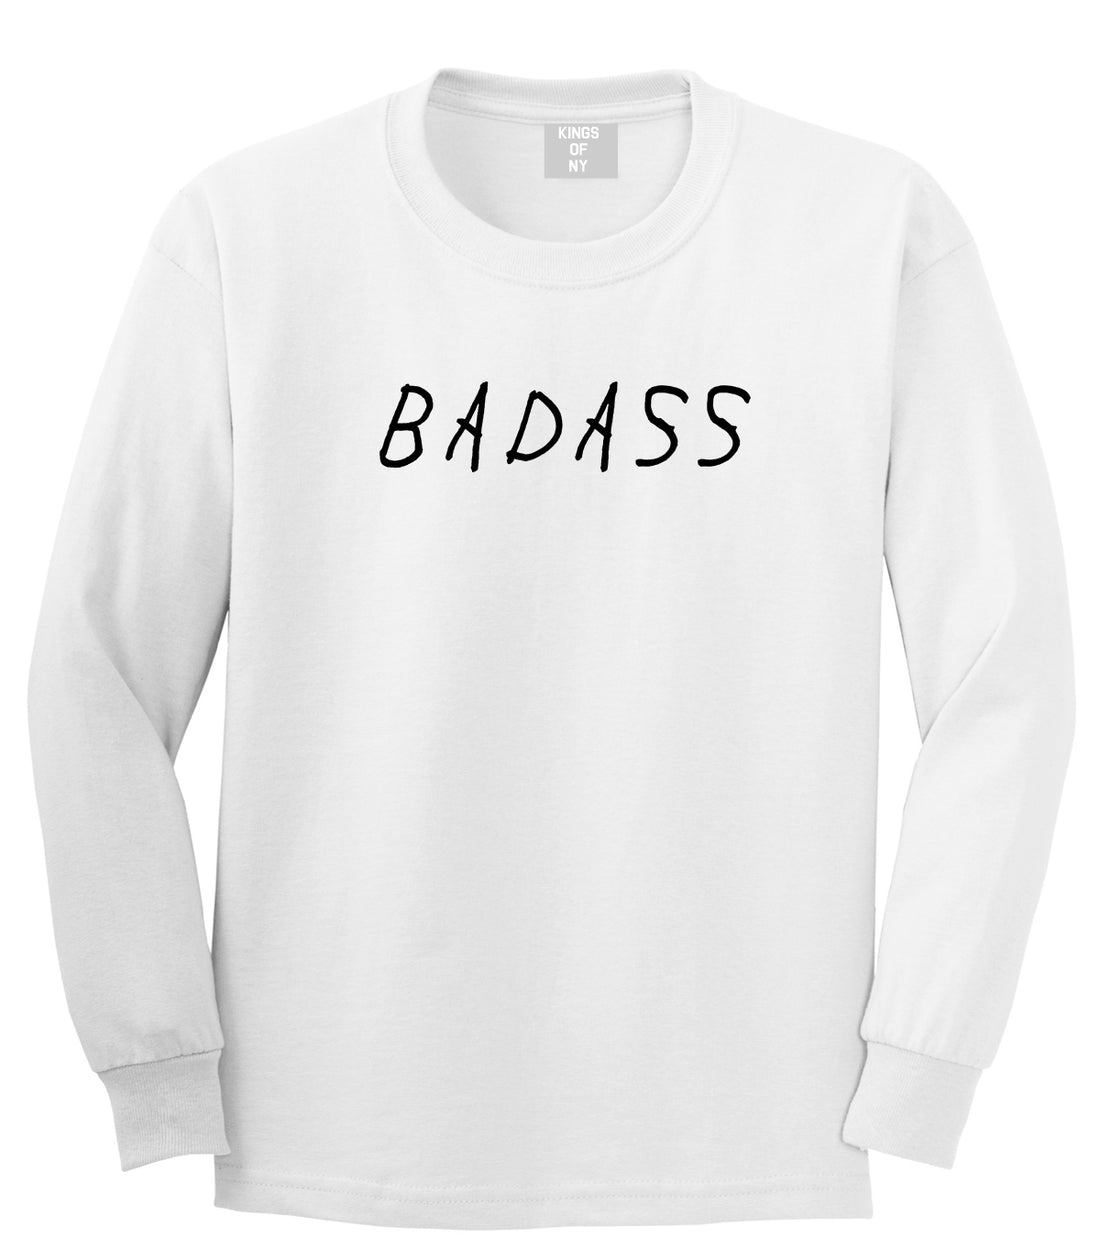 Badass White Long Sleeve T-Shirt by Kings Of NY